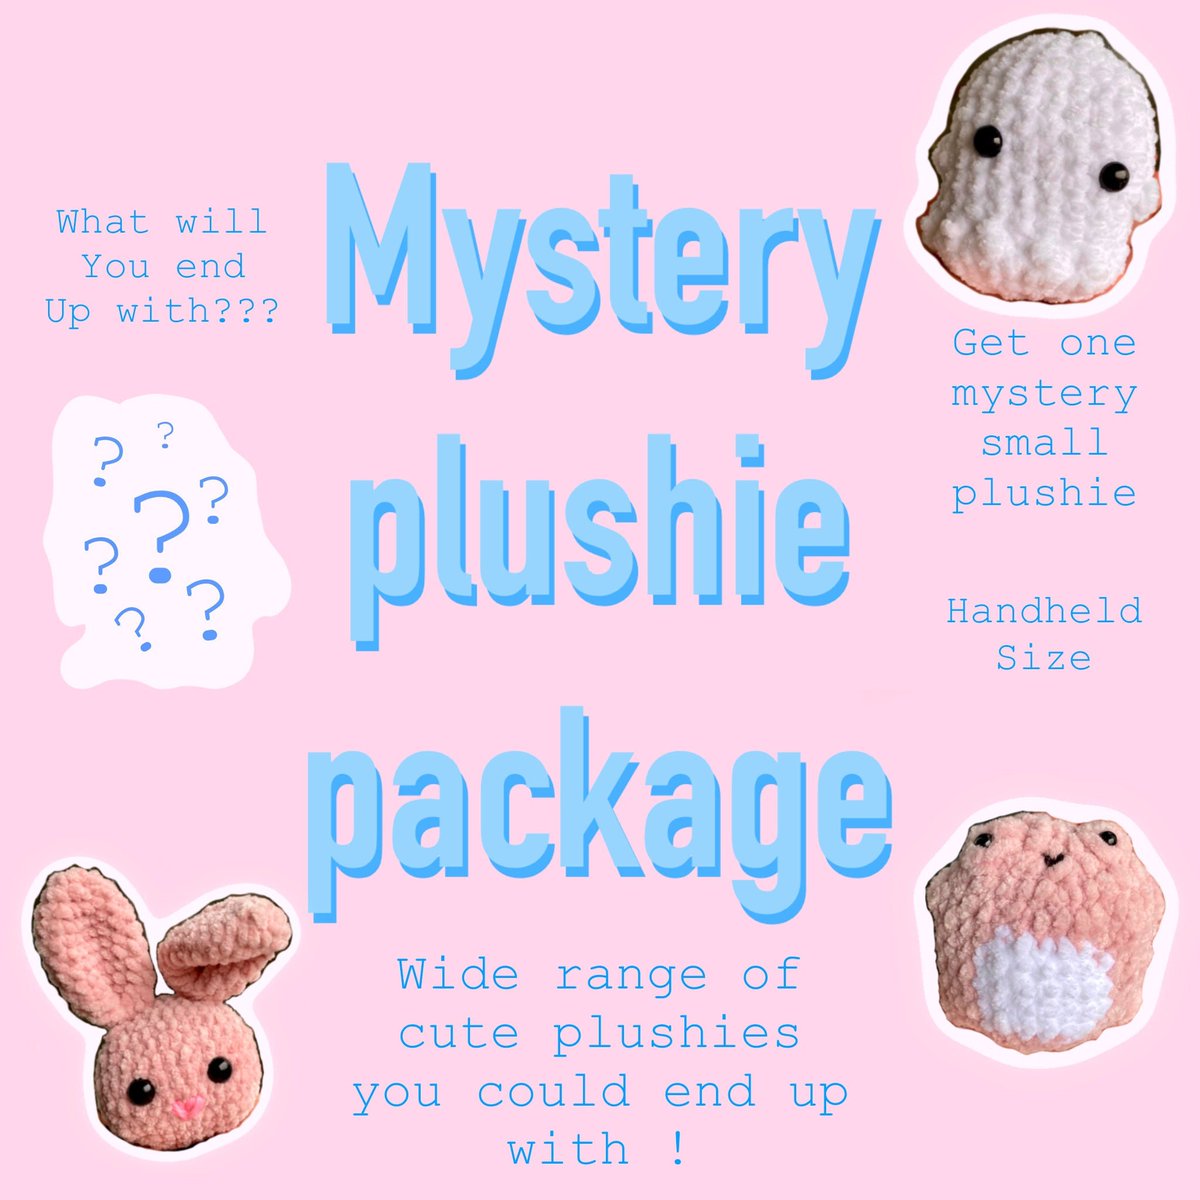 Excited to share the latest addition to my #etsy shop: Mystery small crochet plushie package etsy.me/3JONhx8 #handmadegift #crochetplushie #crochetplush #crochetamigurumi #amigurumiplush #amigurumiplushie #plushamigurumi #plushieamigurumi #mysterybox